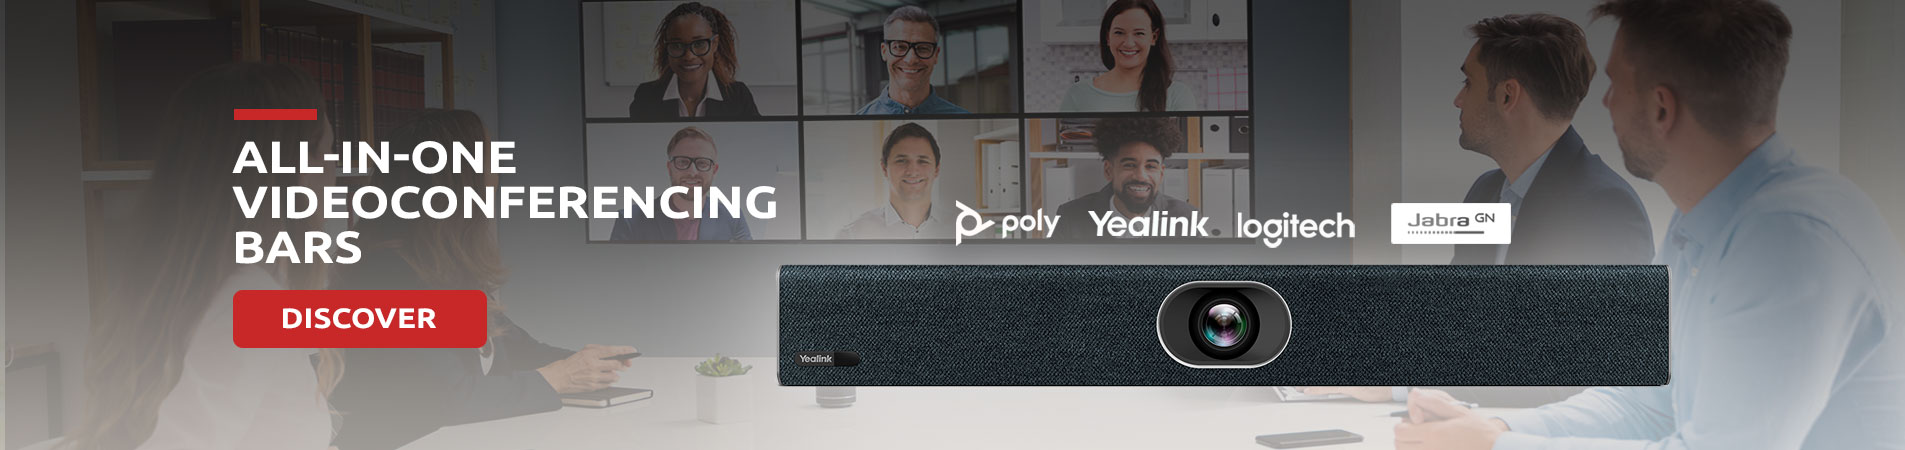 ALL-IN-ONE VIDEOCONFERENCING BARS